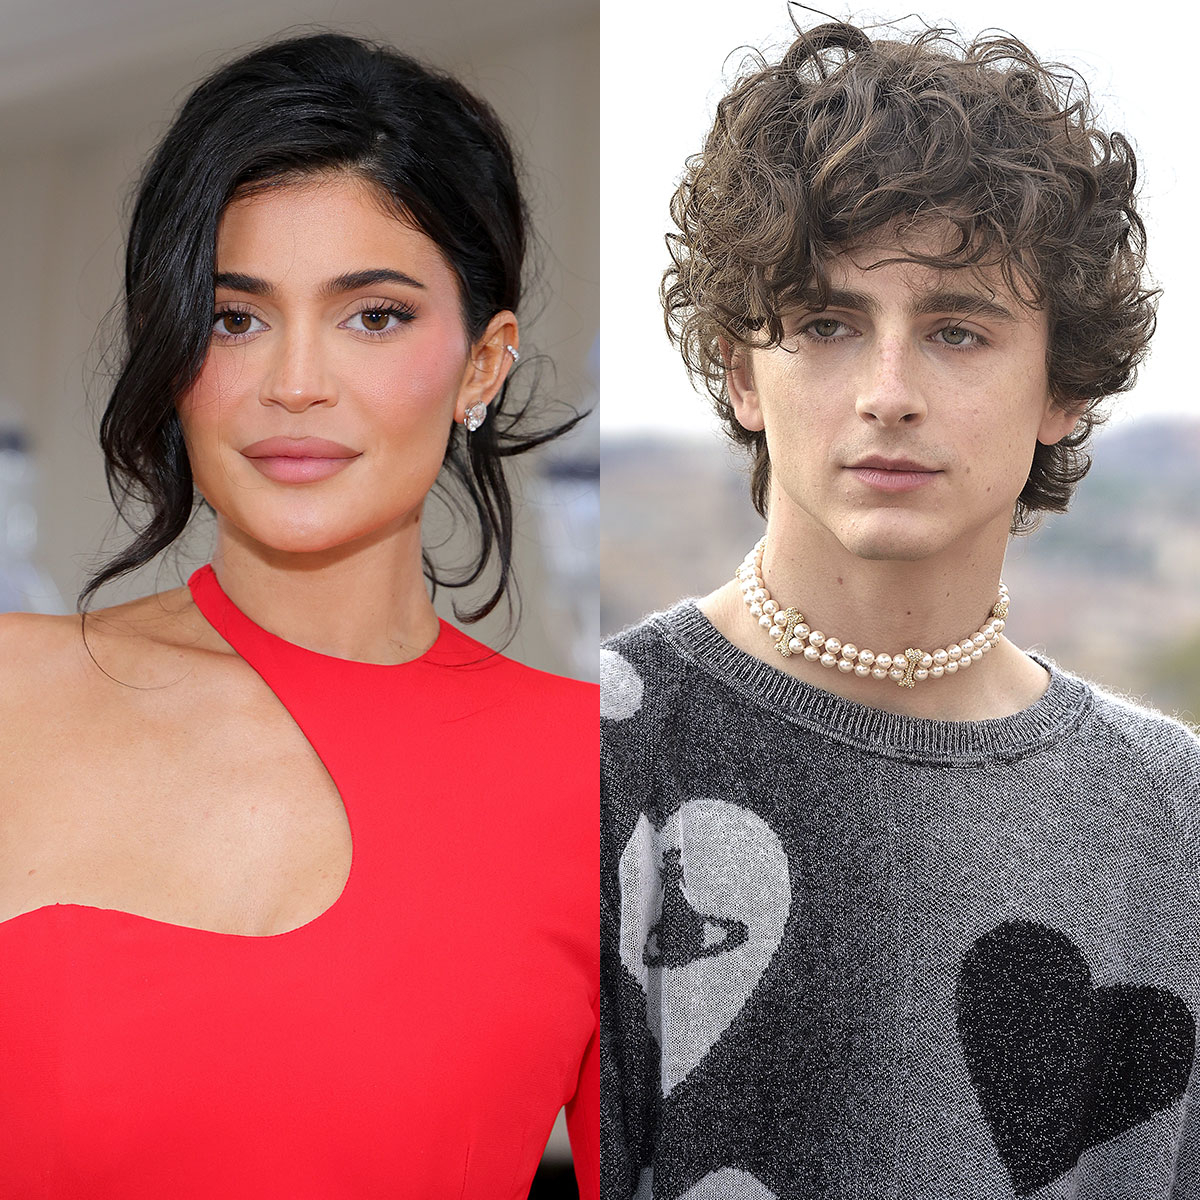 Kylie Jenner and Timothée Chalamet Step Out Together for the First Time in Months - E! Online